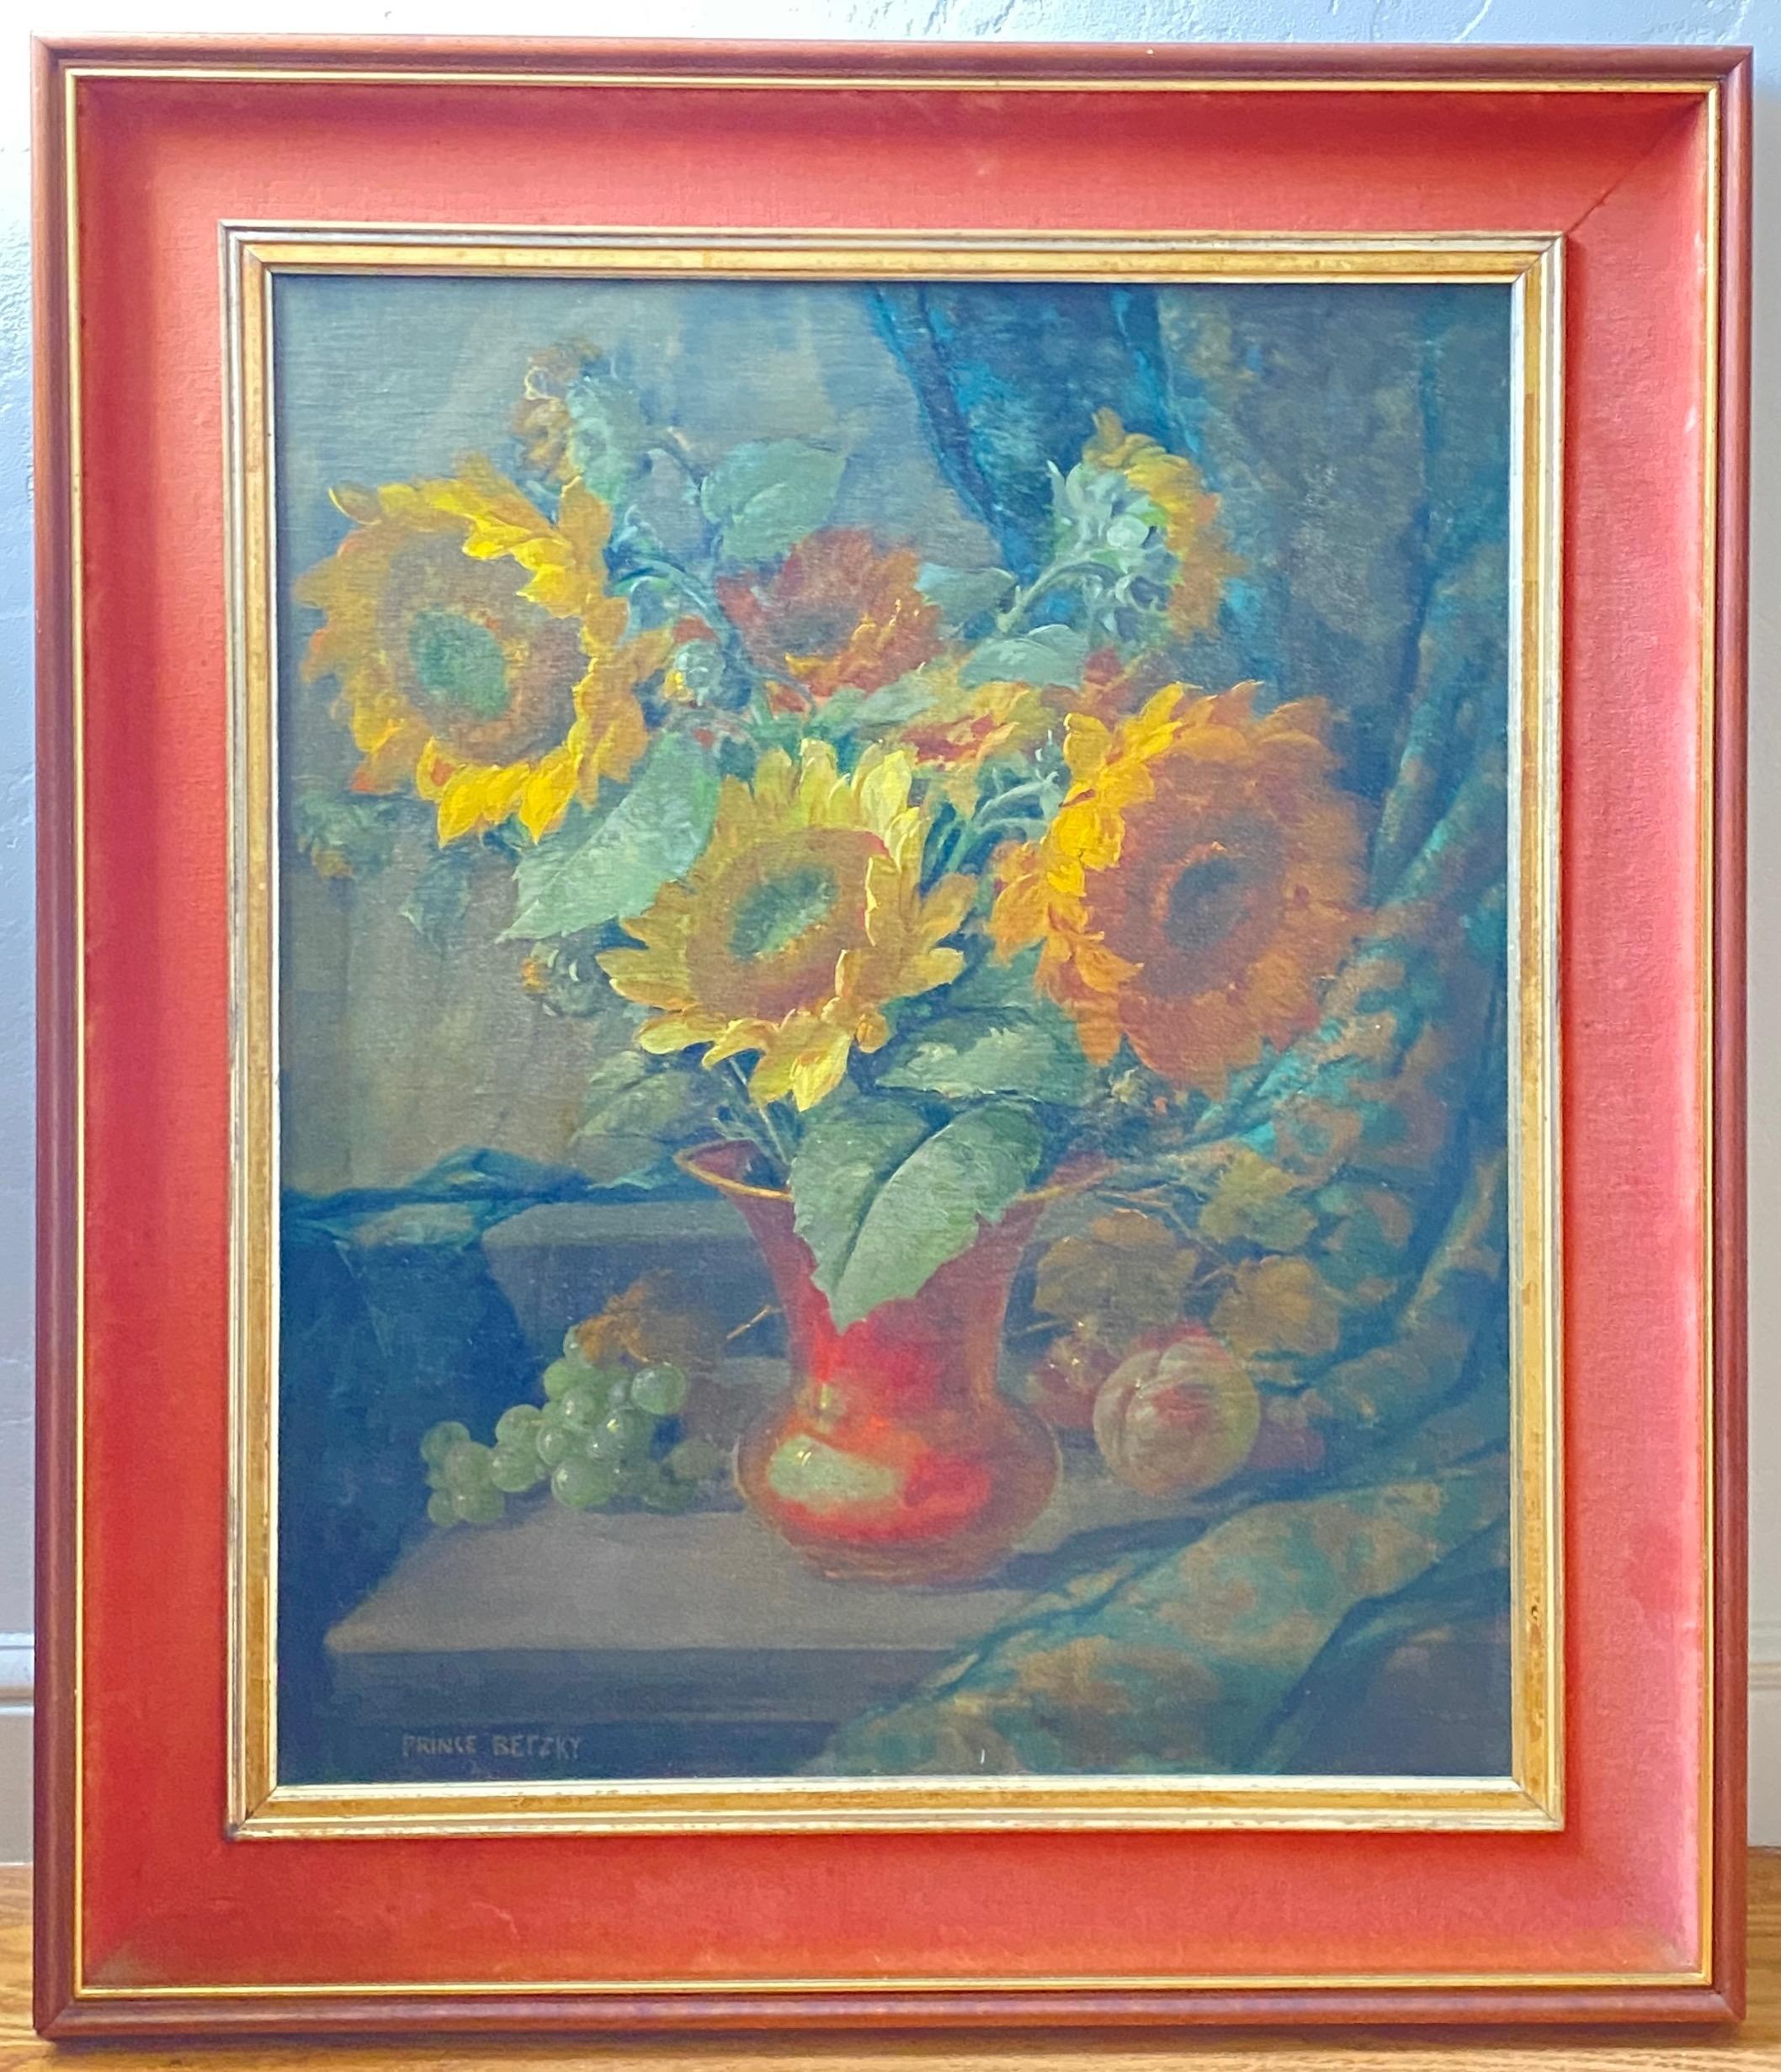 An exceptionally well painted still life of sunflowers, signed Prince Brezky and date 1946.
Oil on canvas in original frame with gilt detail and orange velvet liner.
A beautiful painting in very good condition.